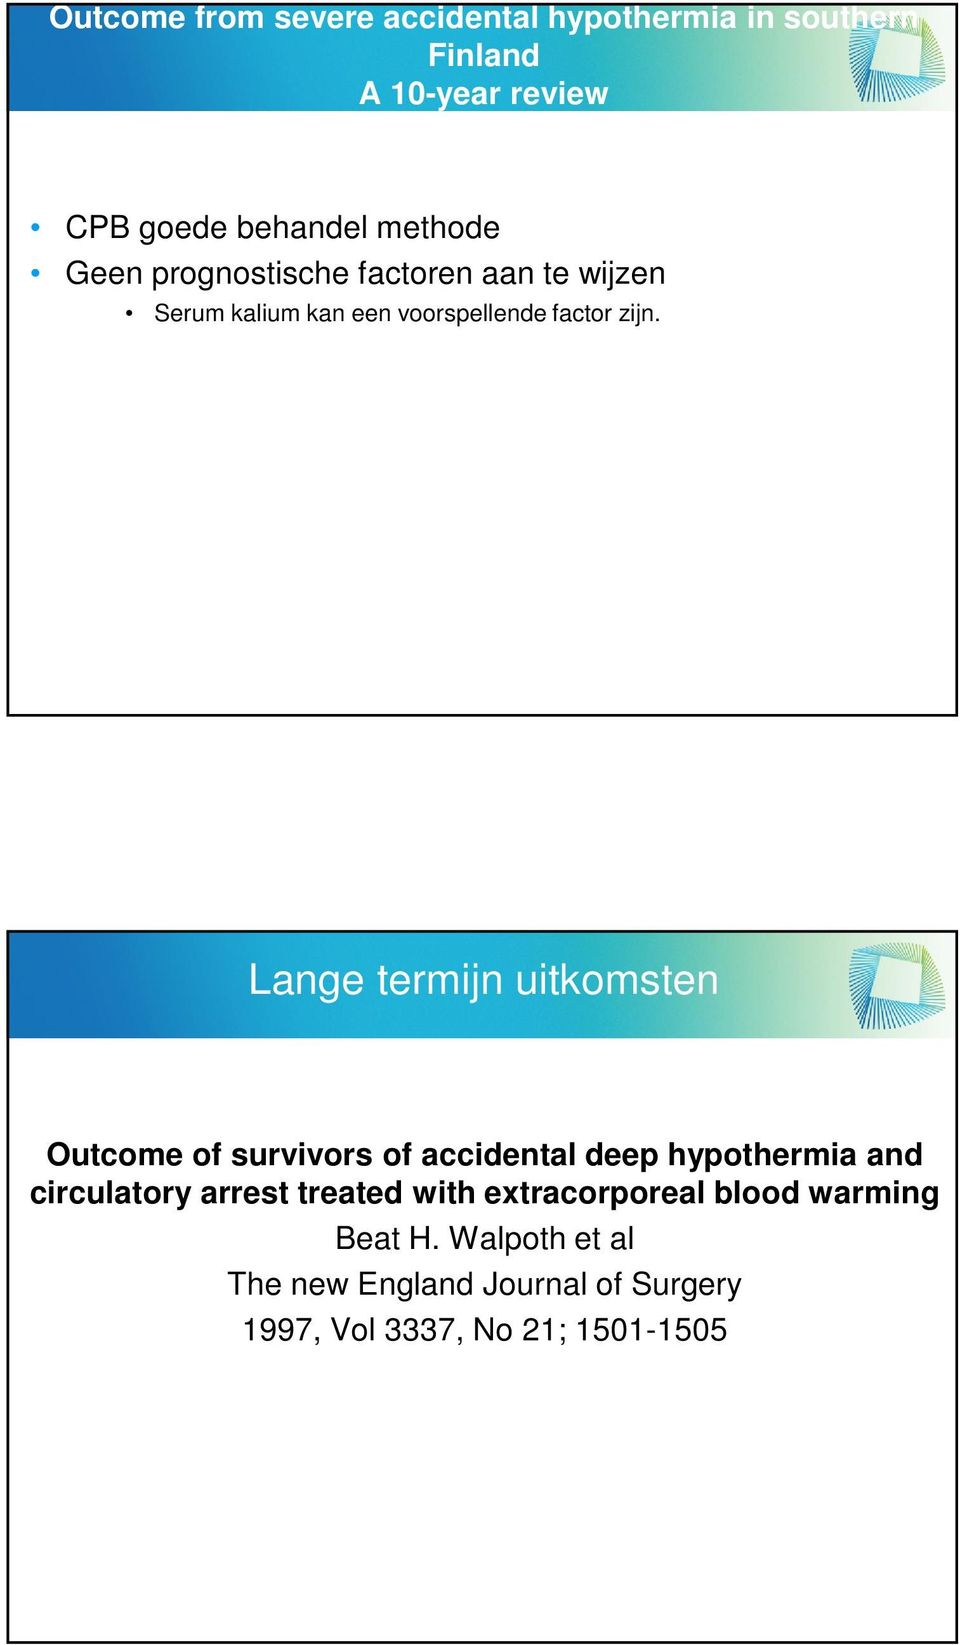 Lange termijn uitkomsten Outcome of survivors of accidental deep hypothermia and circulatory arrest treated